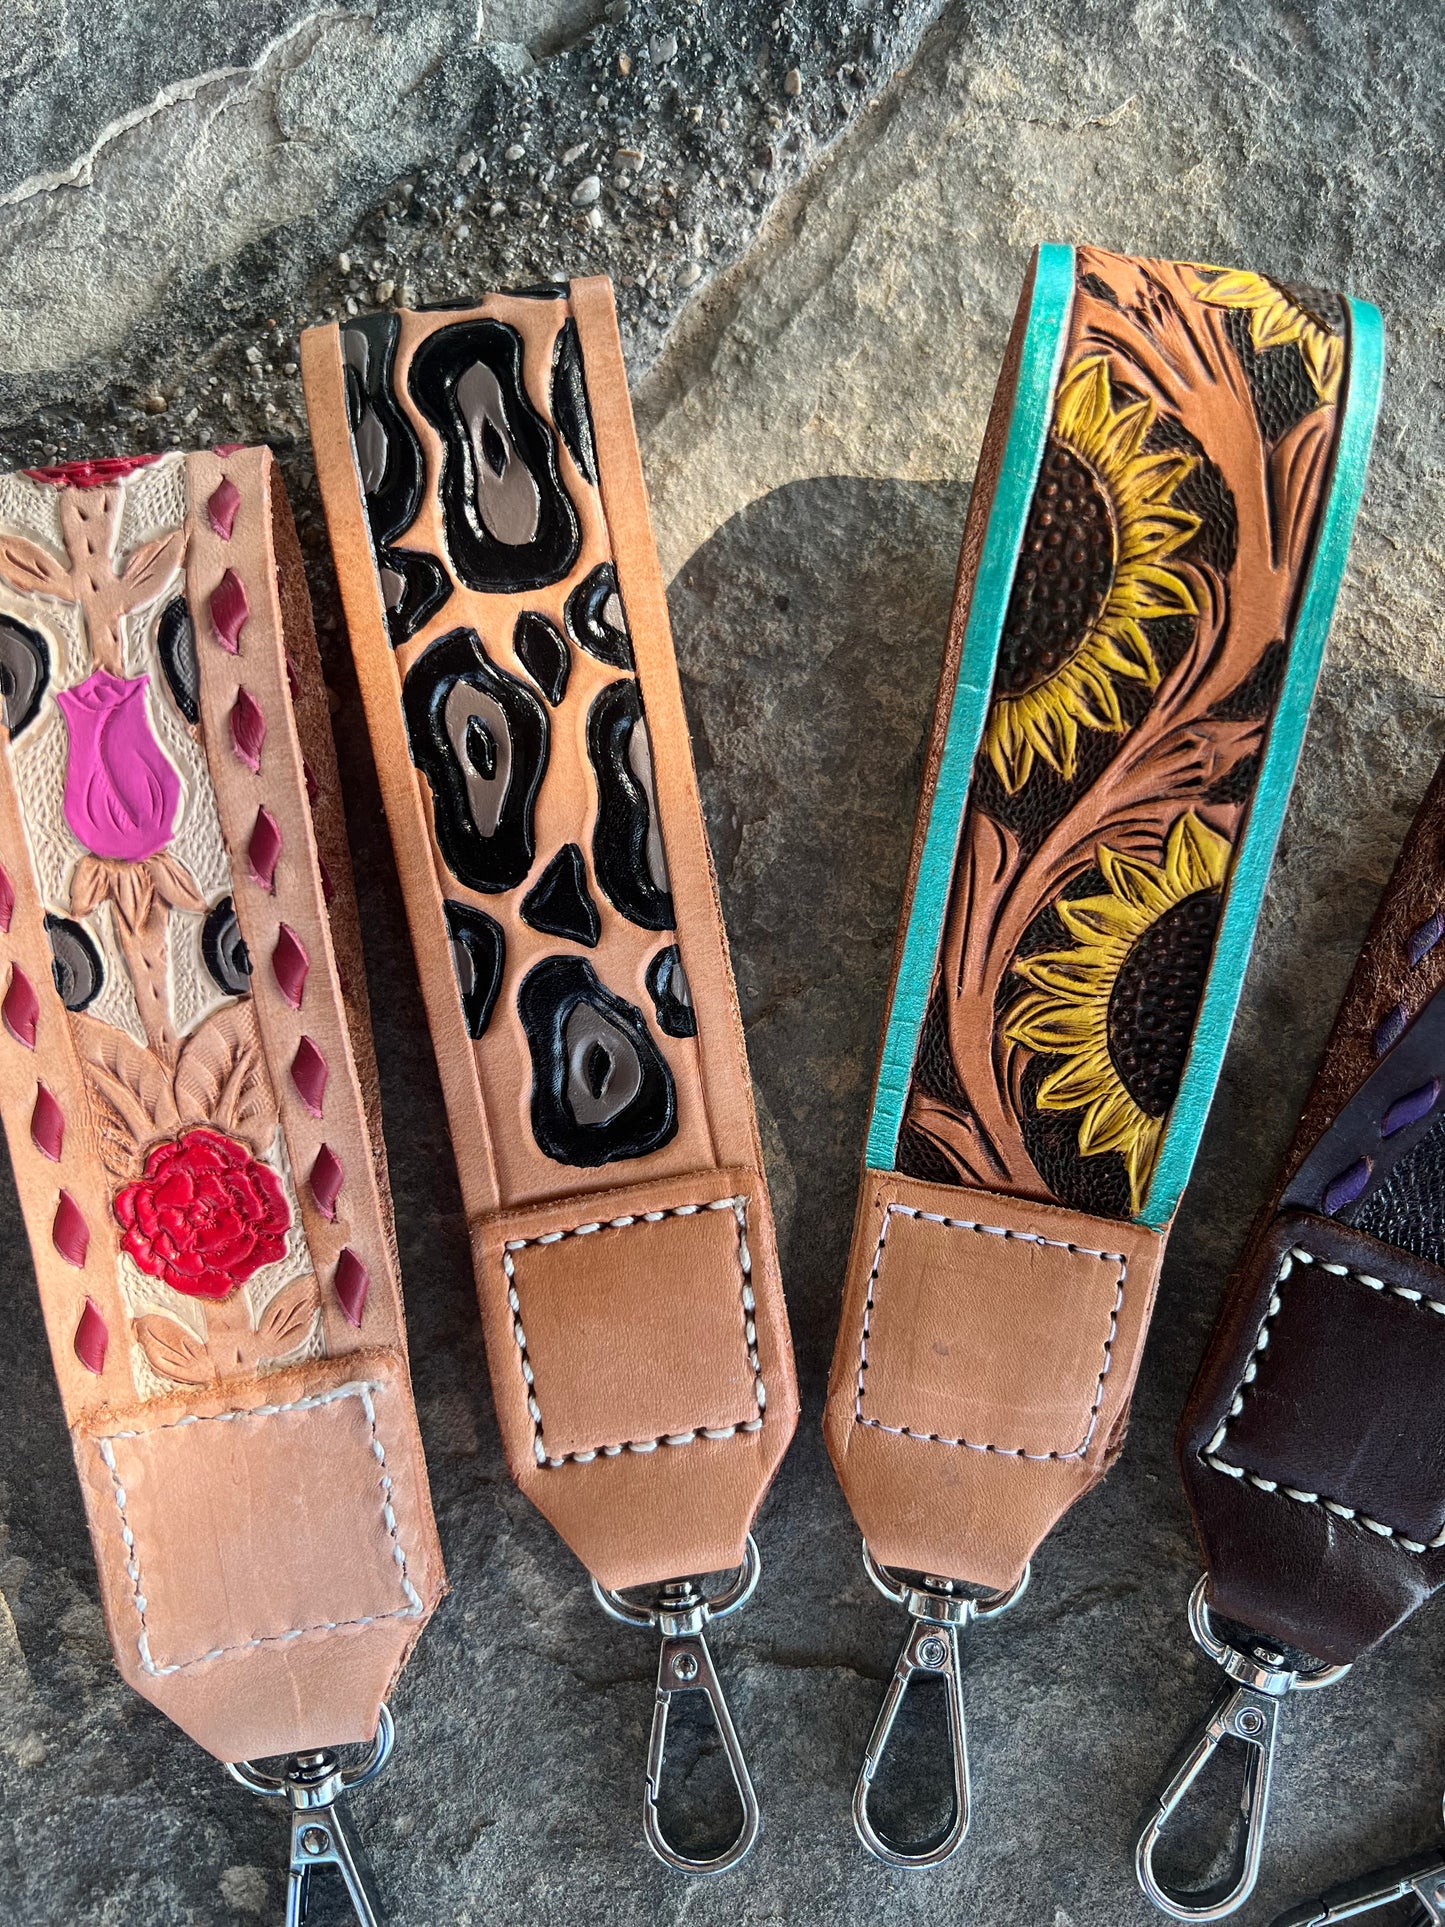 Floral tooled leather keychains